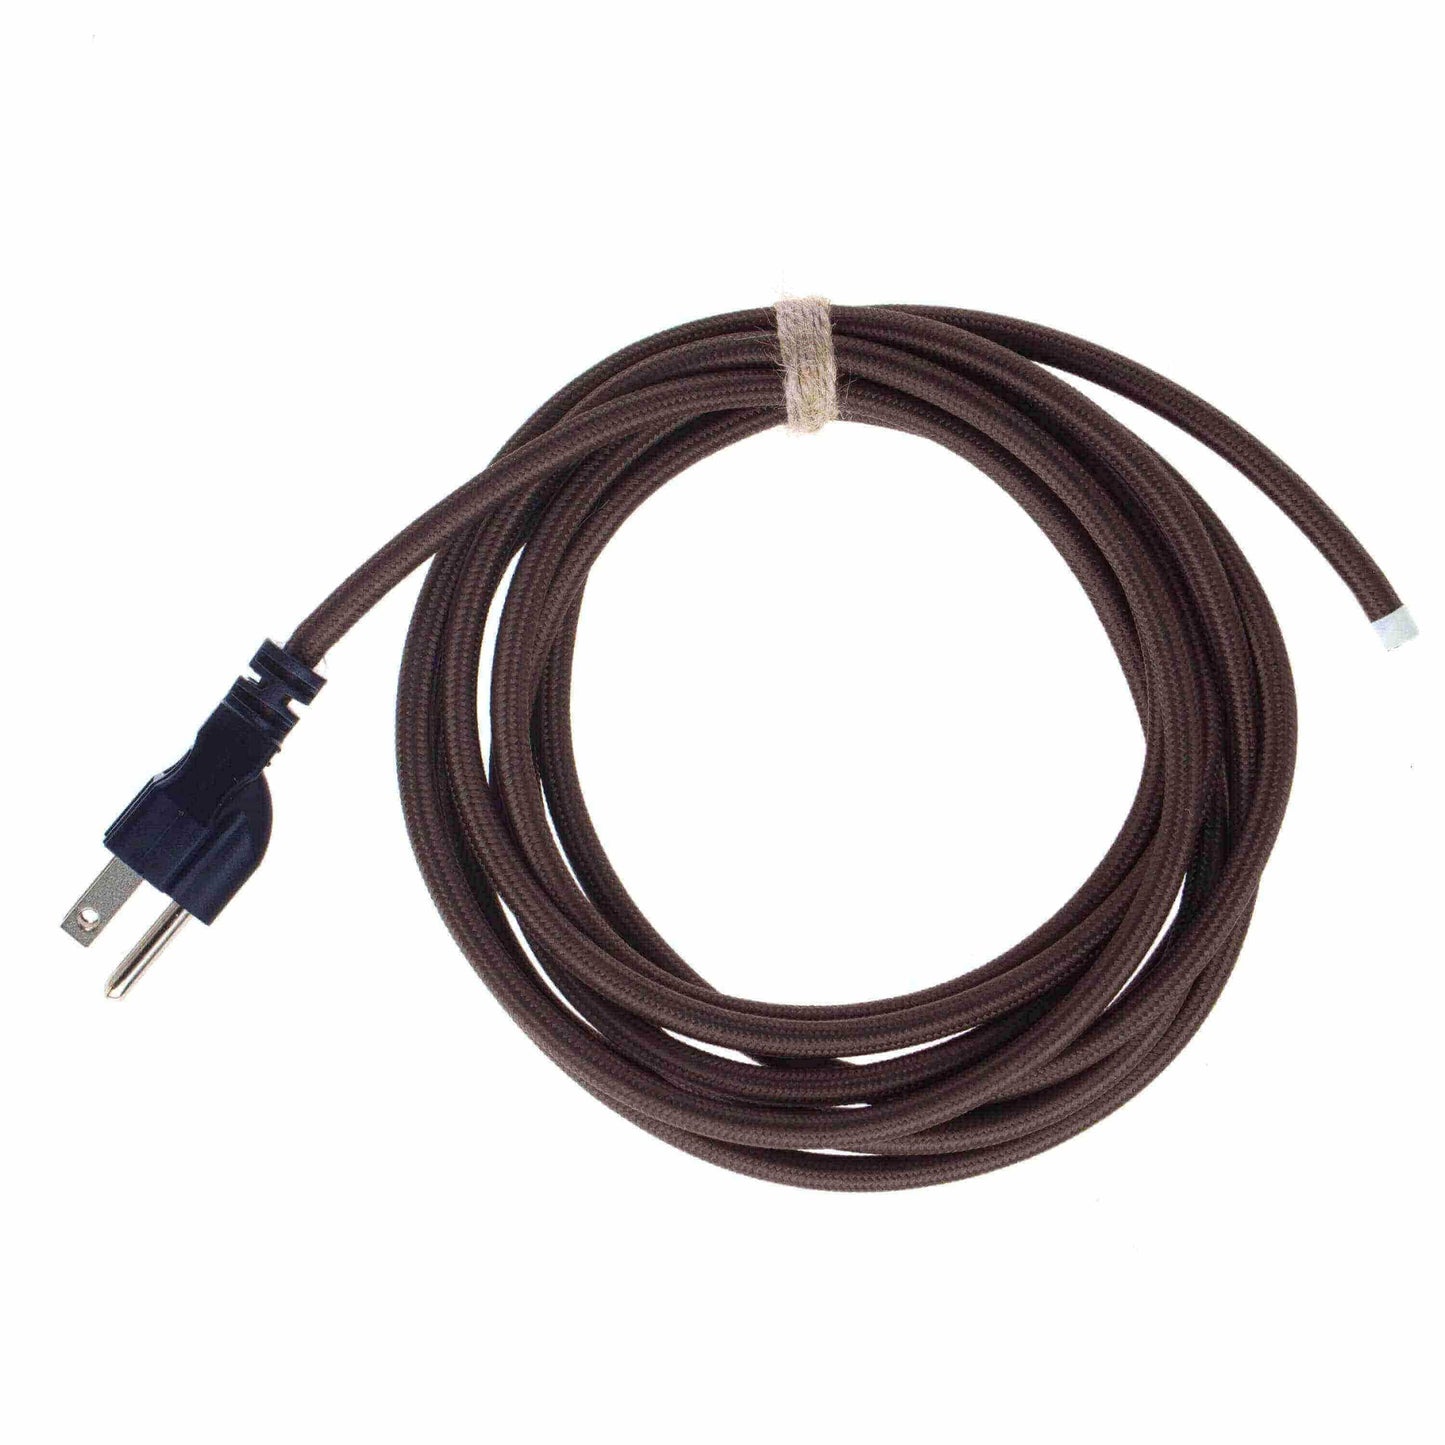 Power Cord Whip - Antique Brown